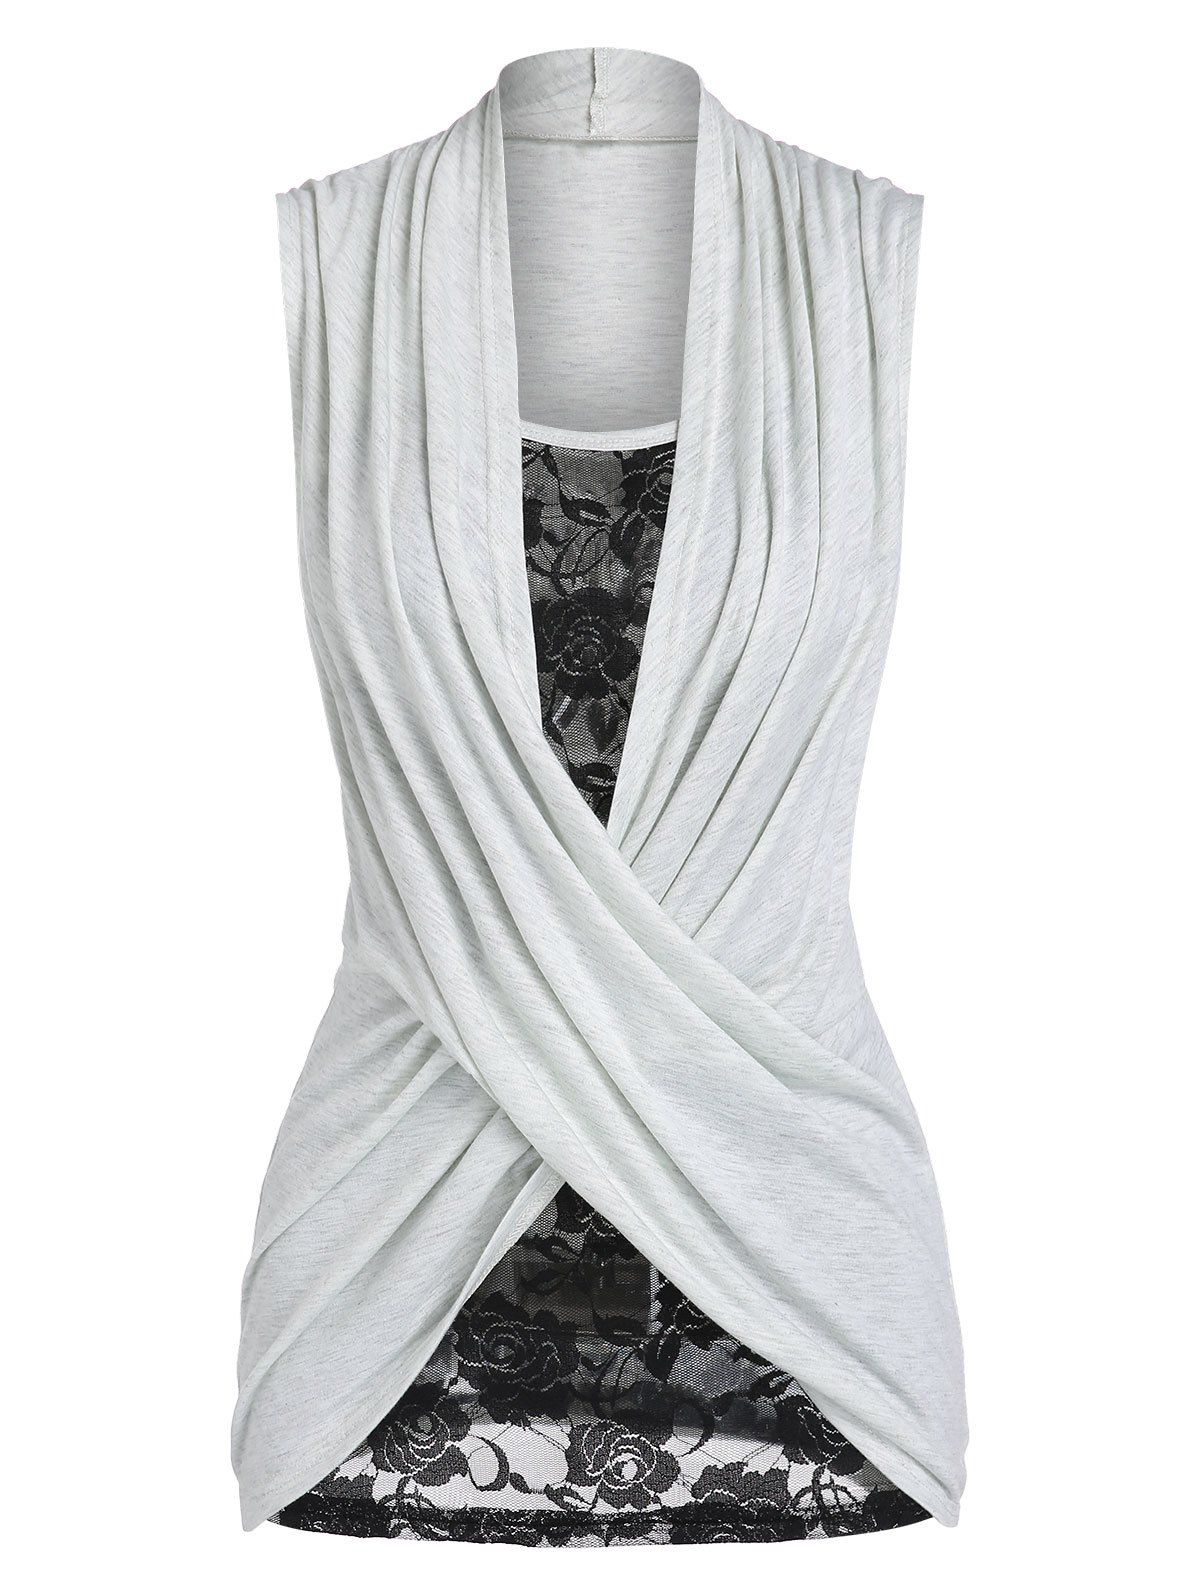 Allover Floral Lace Insert Cami Top and Heather Cross Ruched Tank Top - LIGHT GRAY XXXL